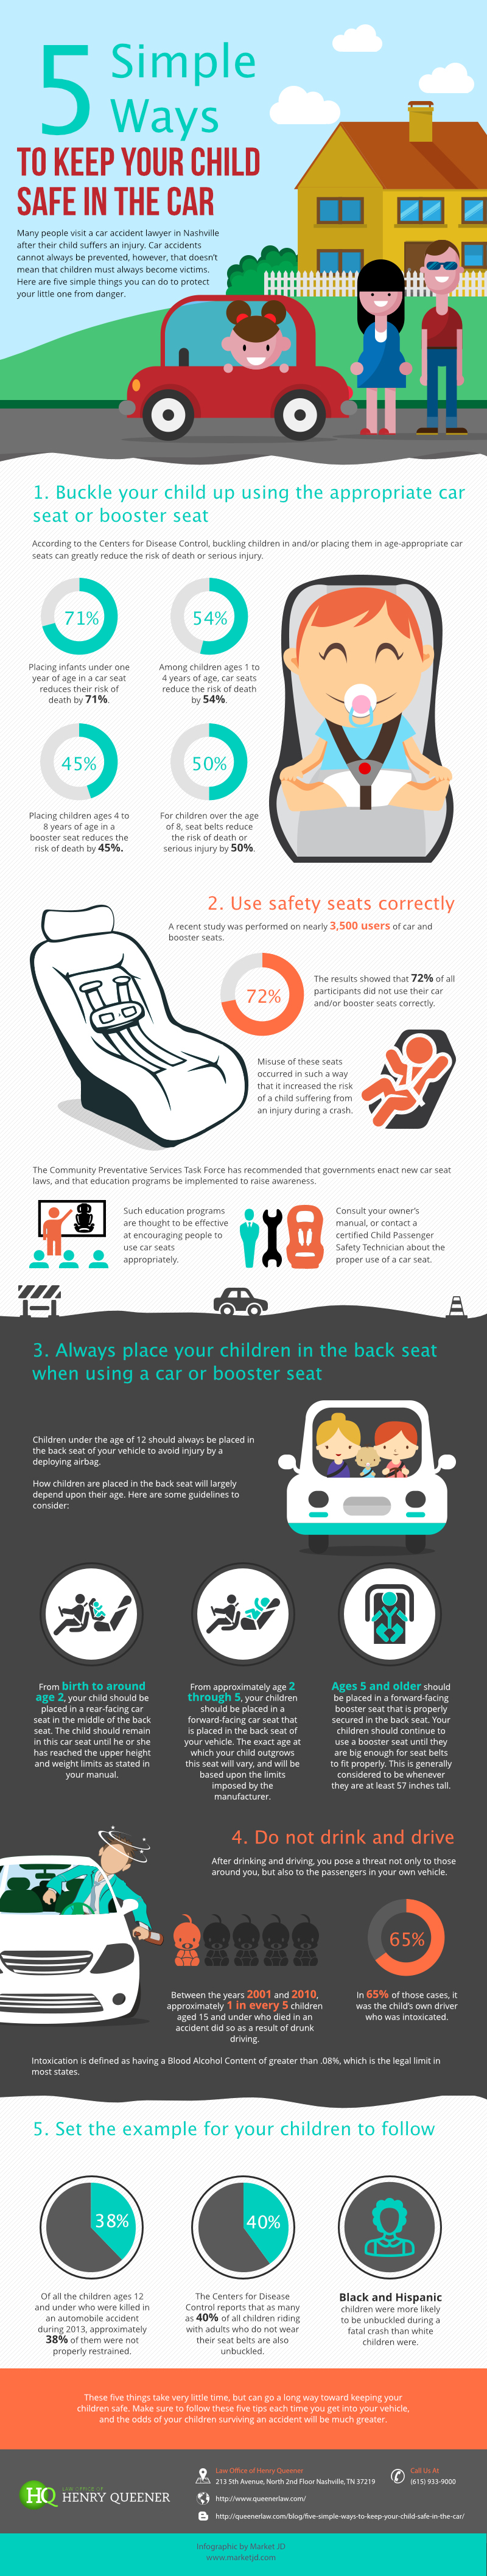 Five simple ways to keep your child safe in the car